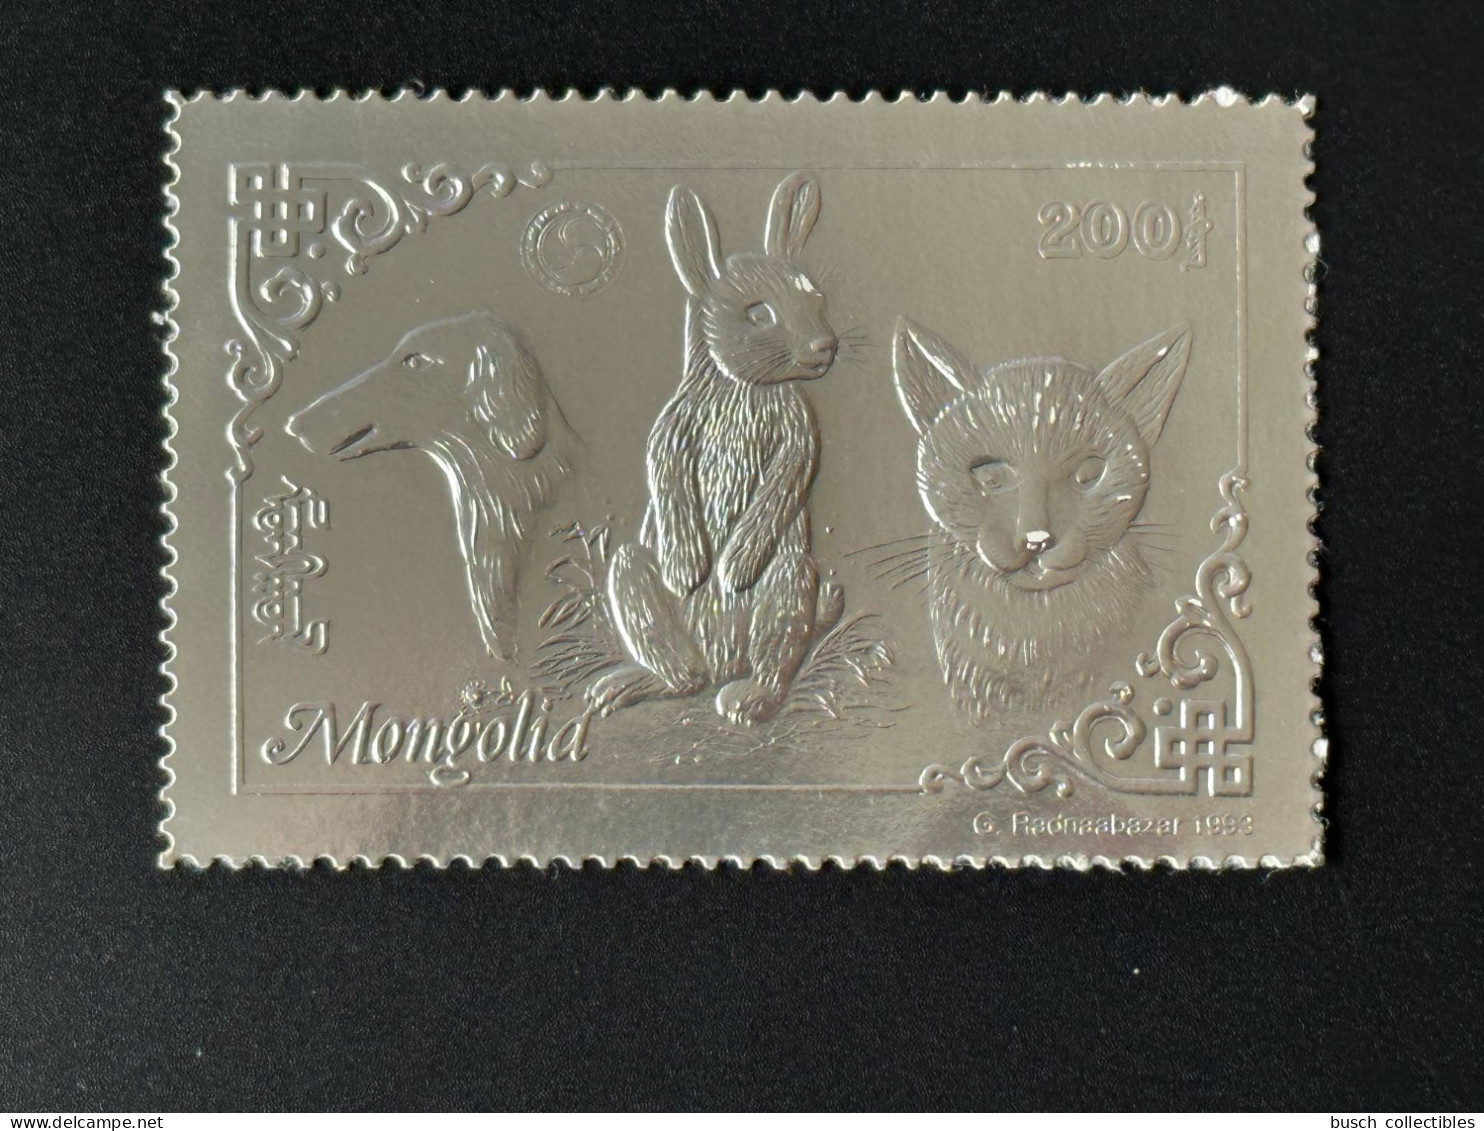 Mongolie Mongolia 1993 Mi. 2474 A Silver Argent Rotary Lions Chien Hund Dog Katze Cat Chat Lapin Rabbit Hase - Mongolei